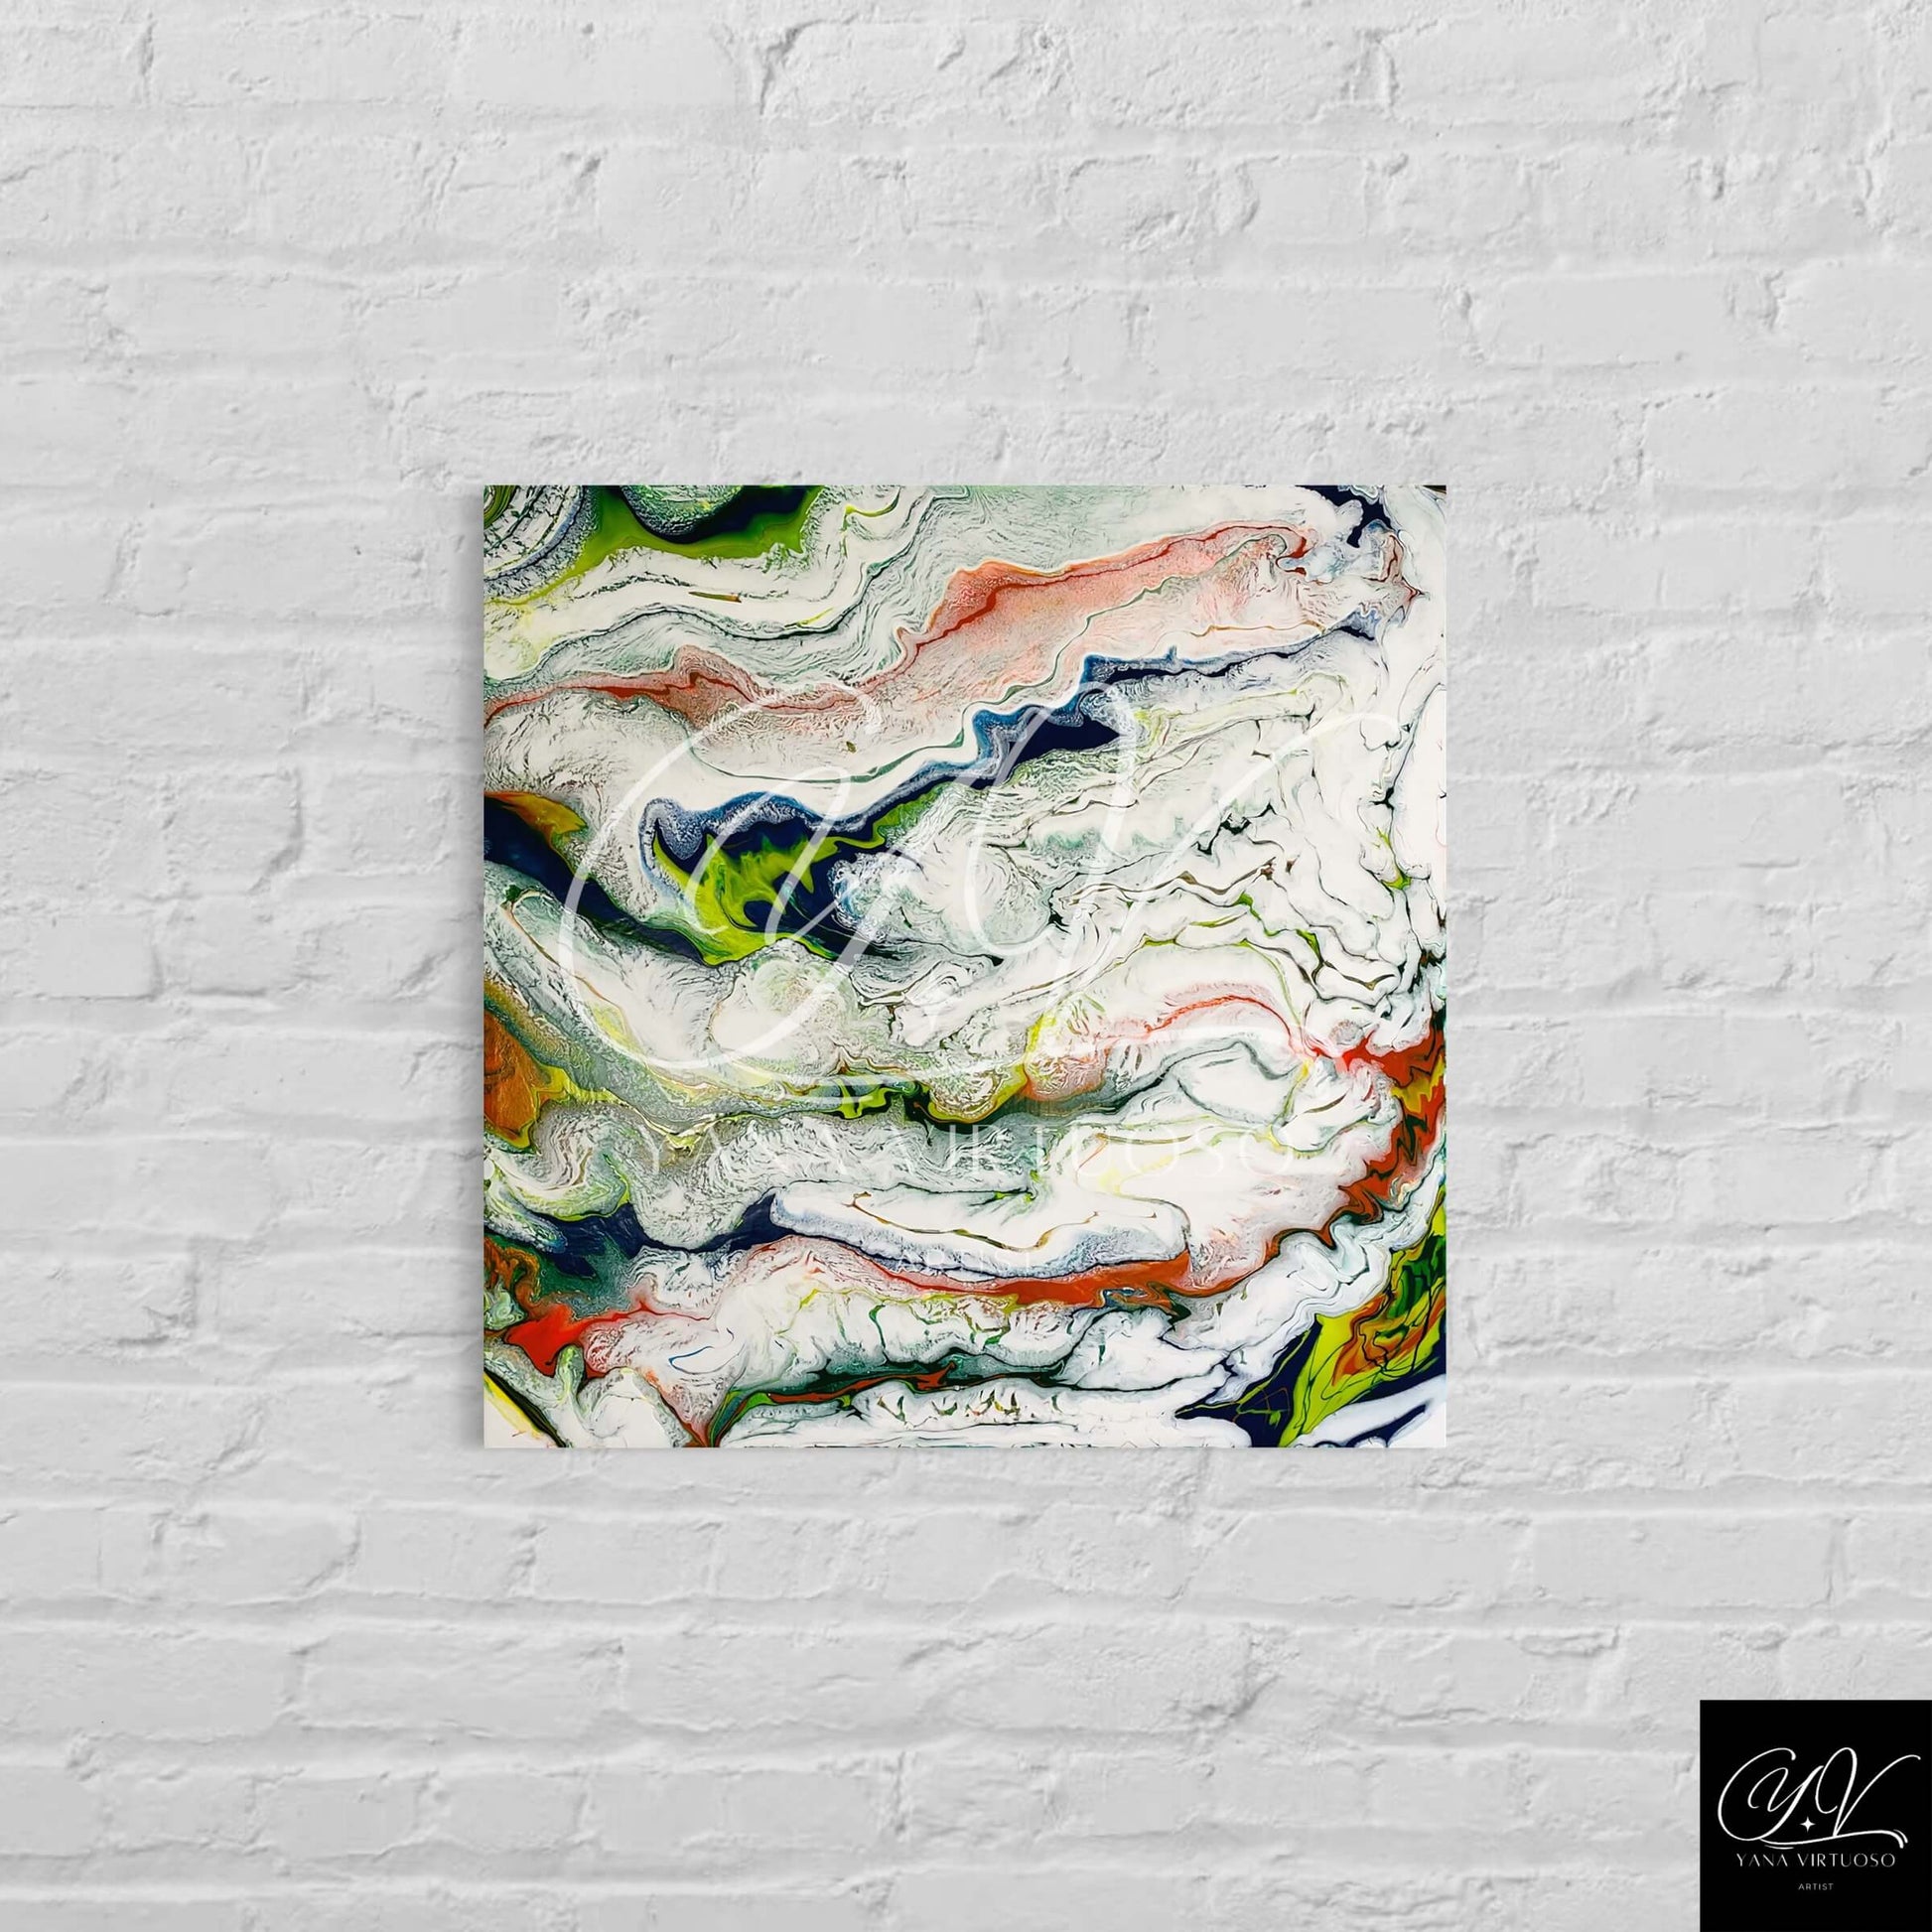 "Waves" painting displayed at a medium distance, hanging on a wall, showcasing its full form in the interior context.